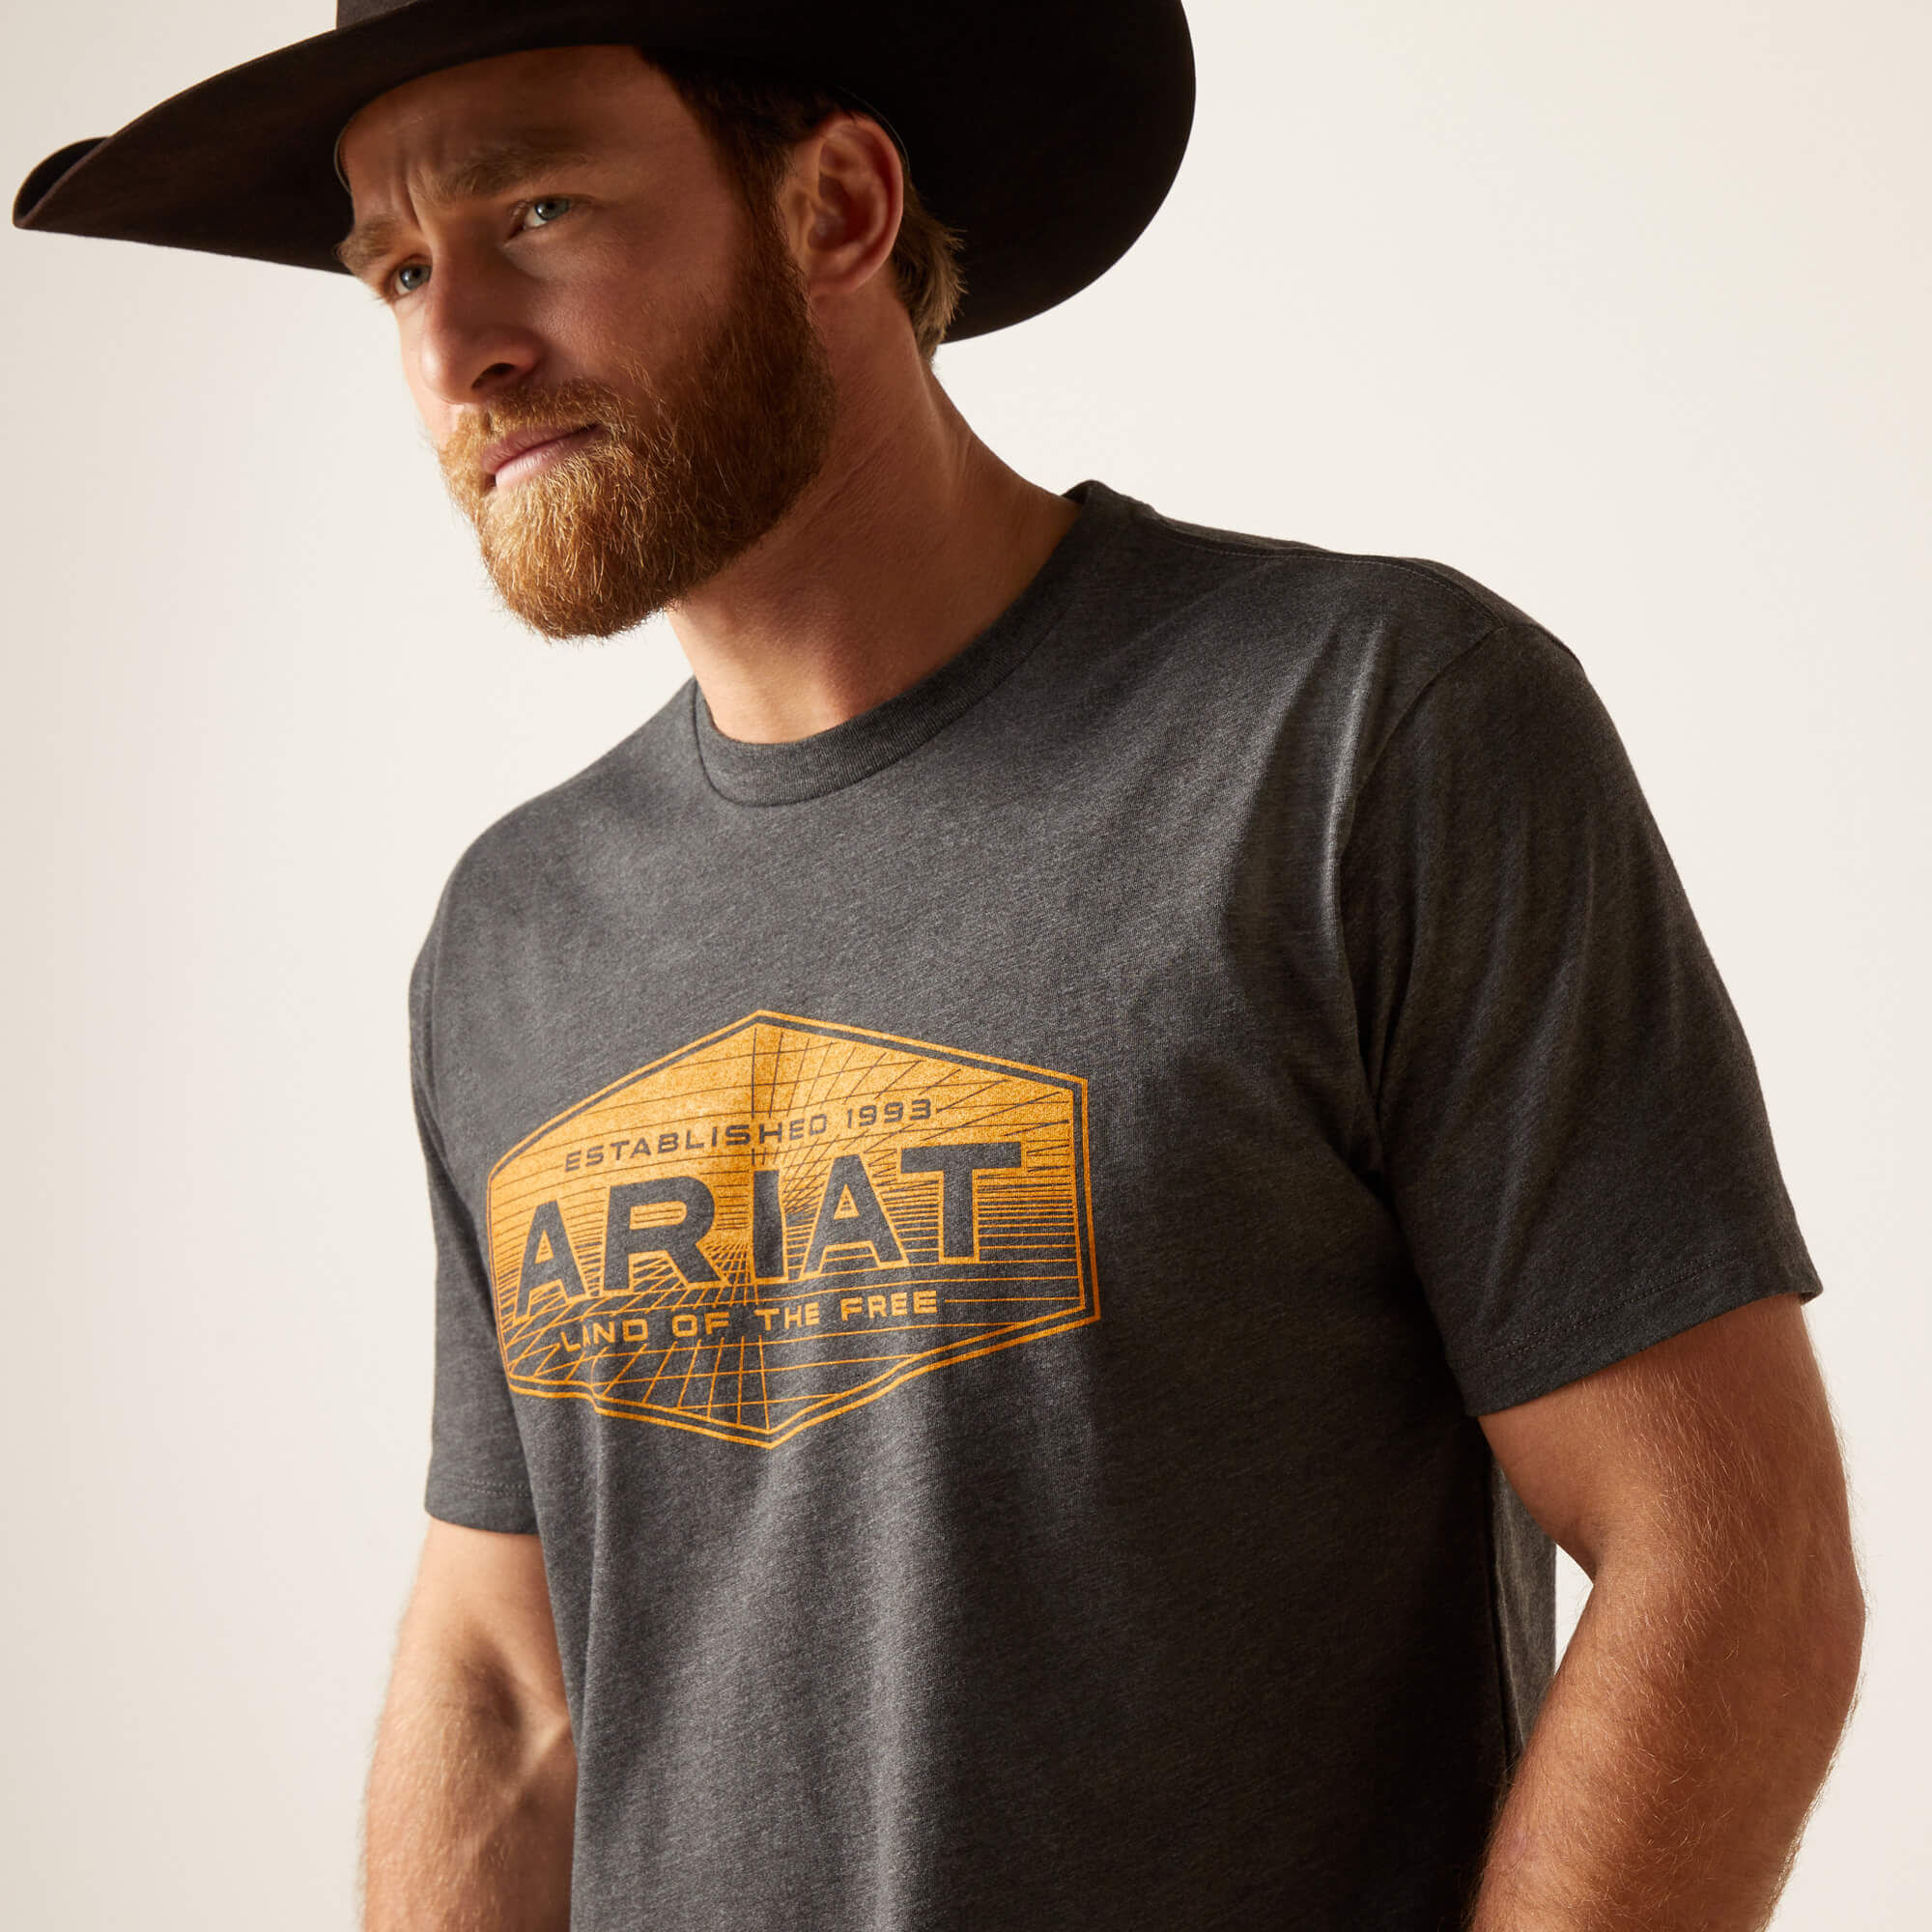 Men's Quadrangle T-Shirt in Charcoal Heather, Size: Small by Ariat